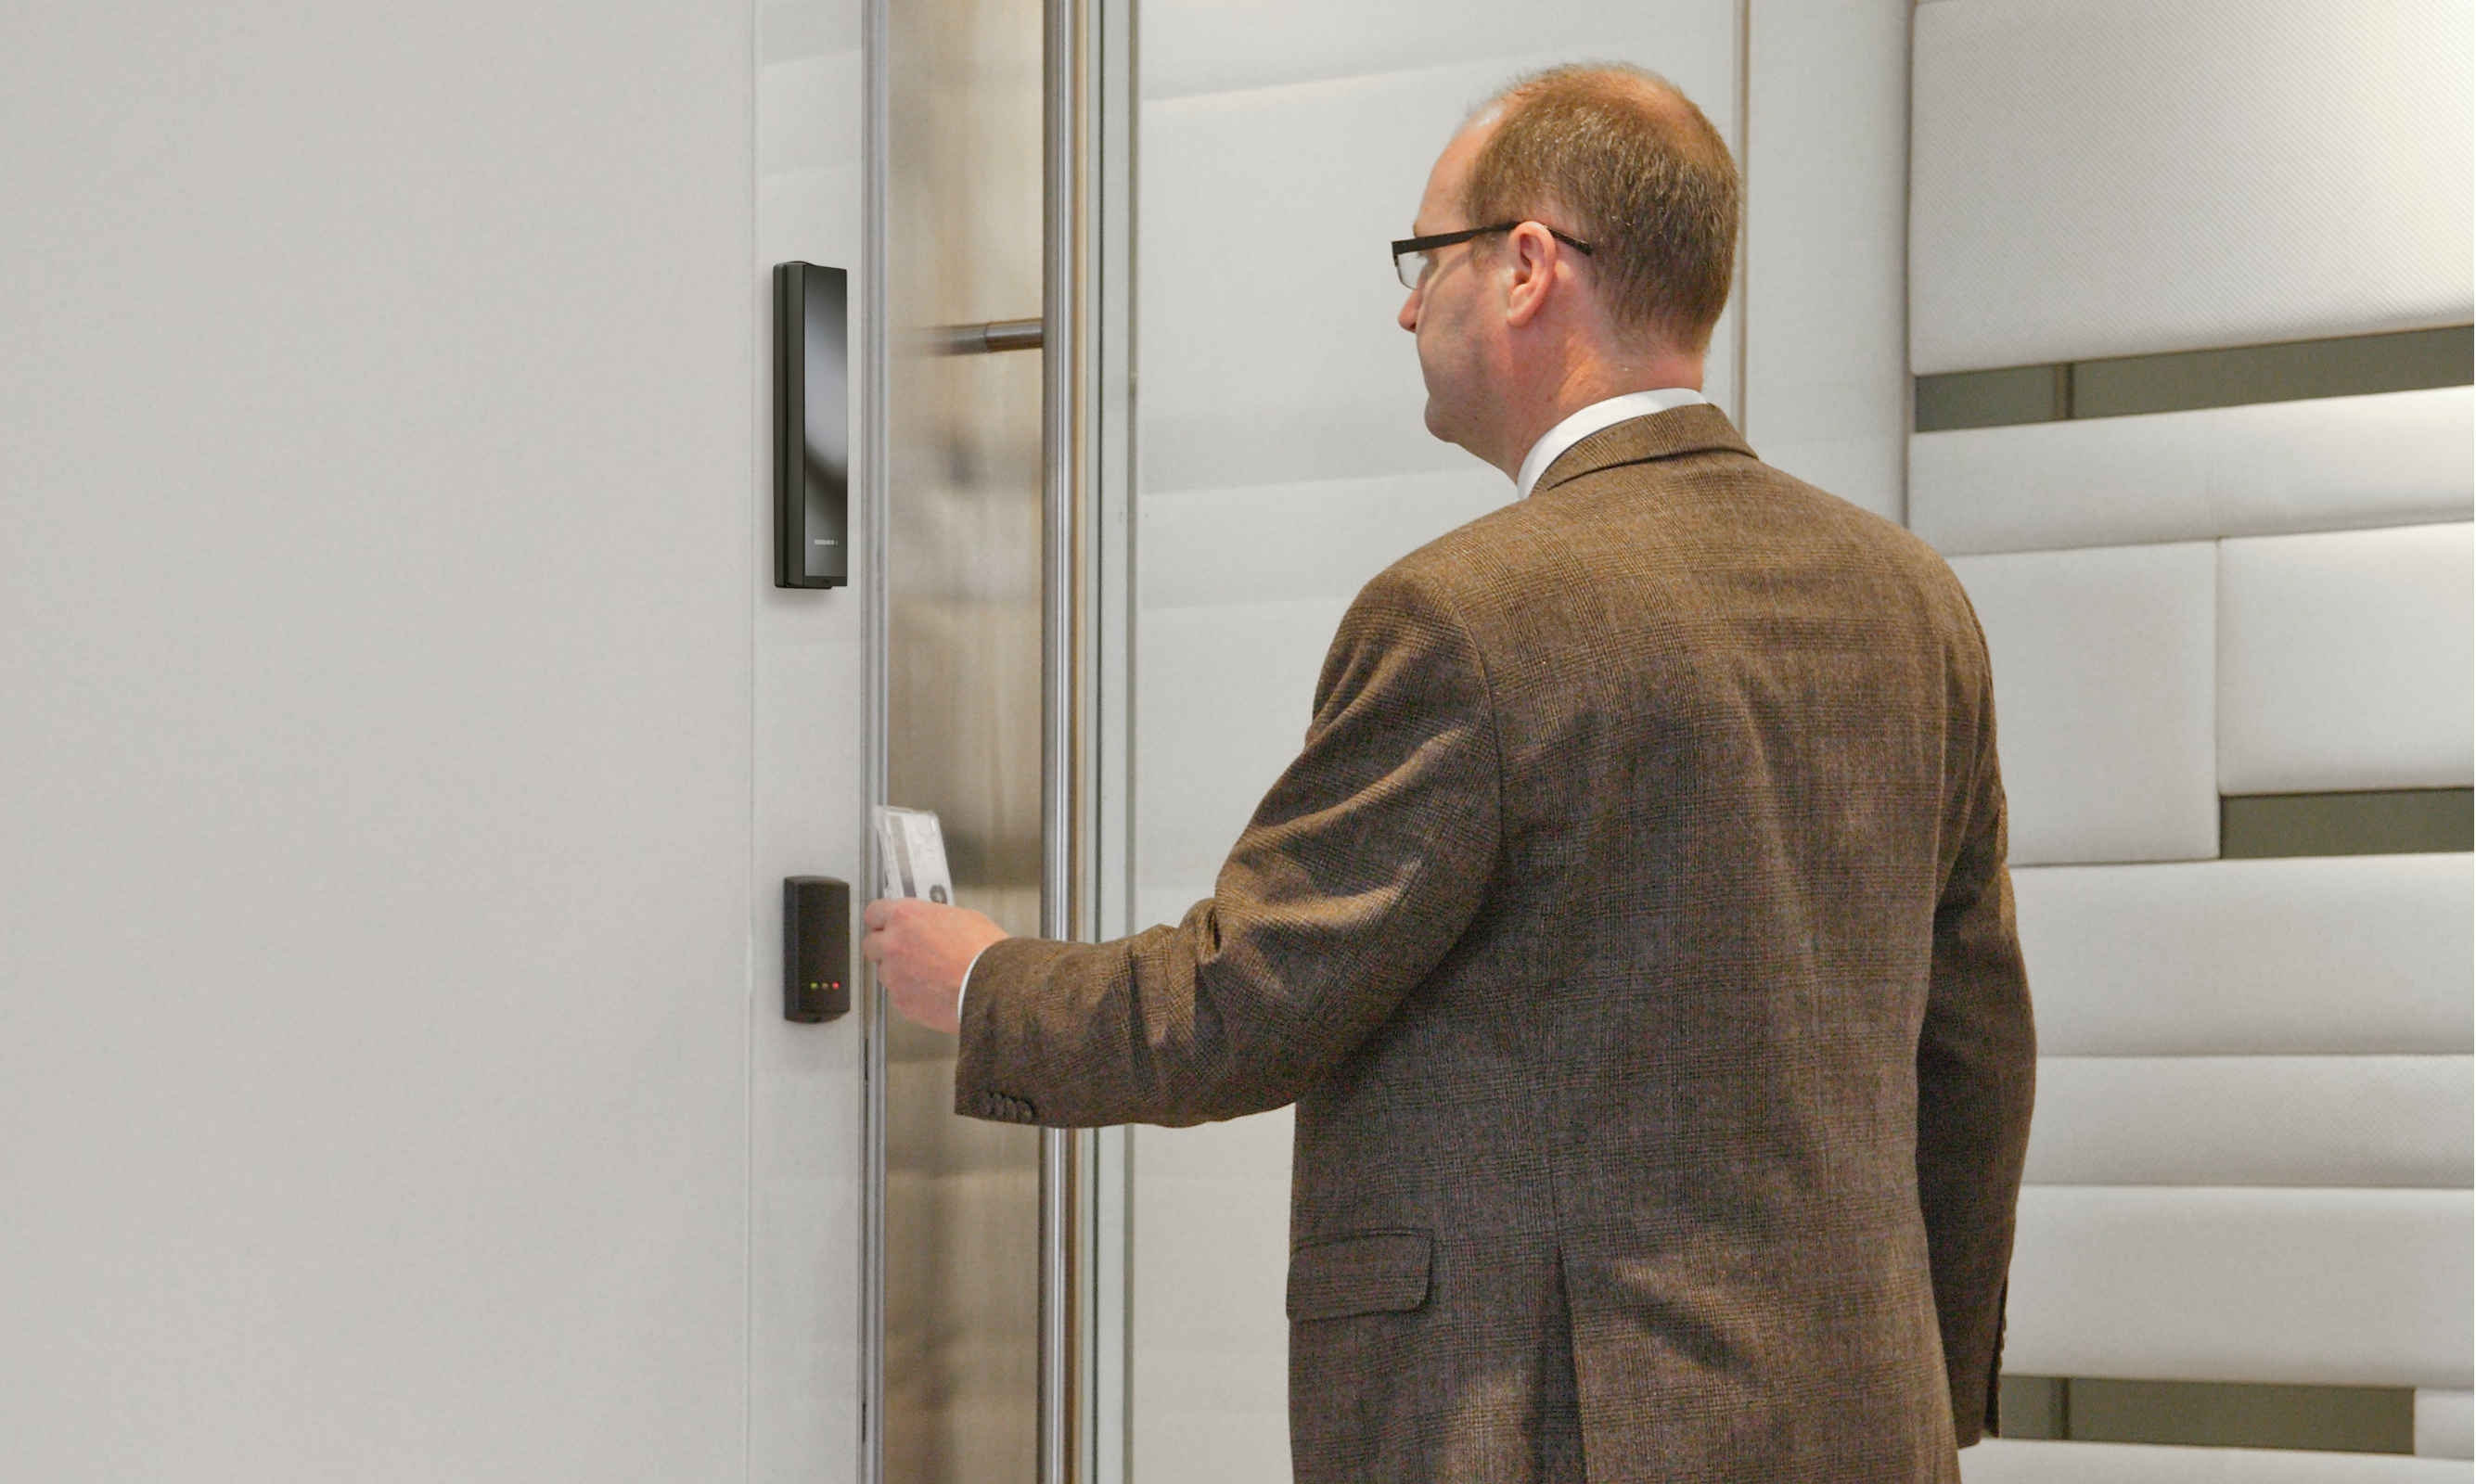 At IFSEC 2016, Aurora unveils breakthrough access control technology straight out of sci-fi